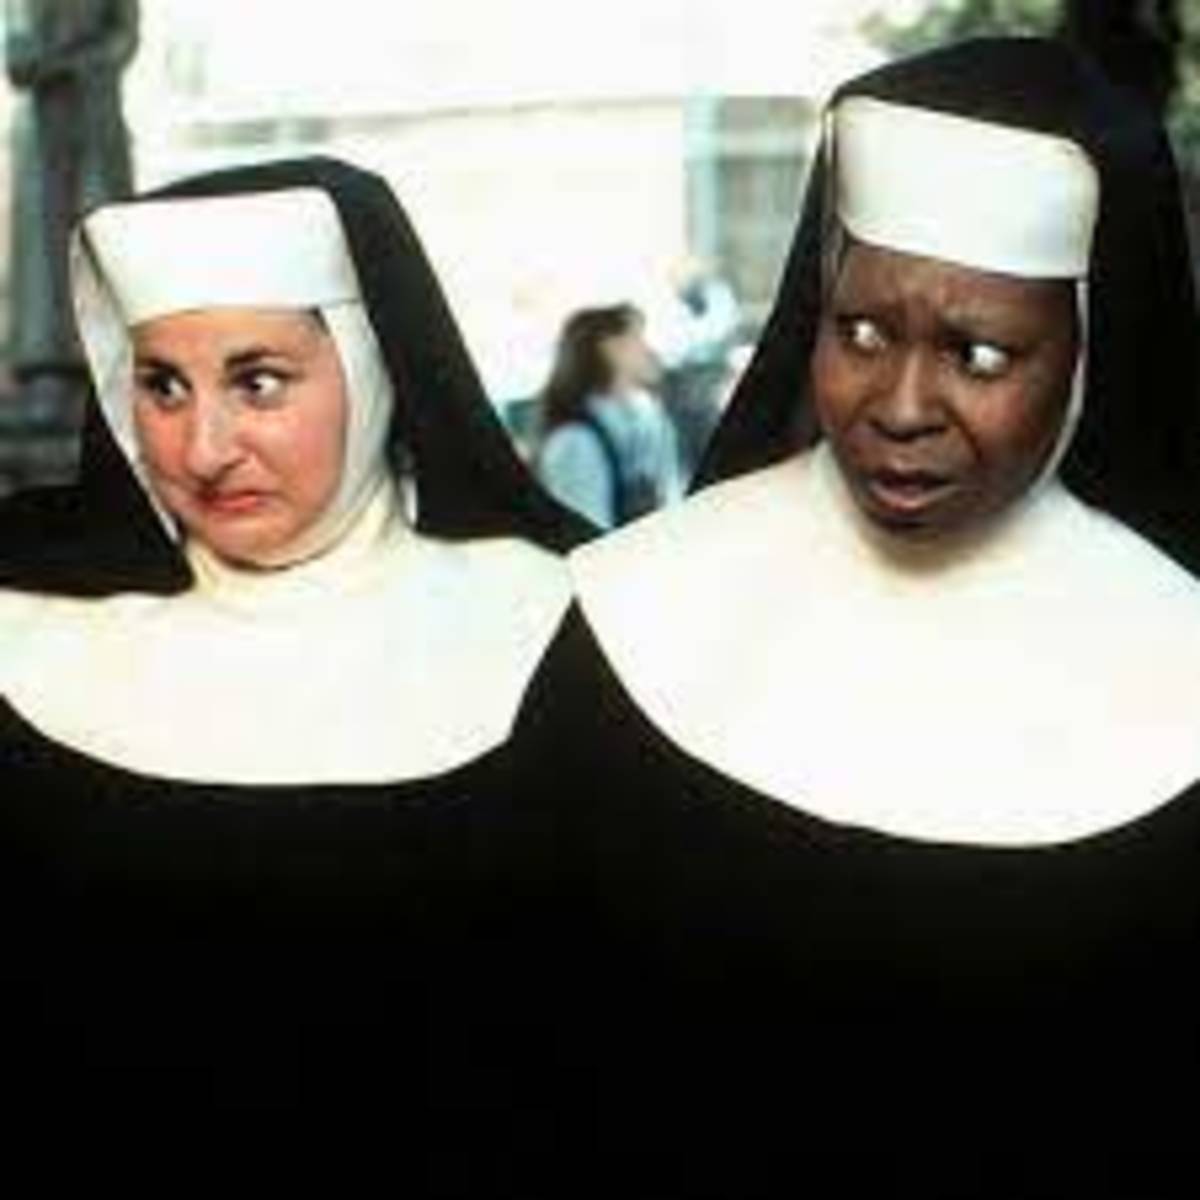 Sister Mary Patrick and Deloris (Whoopi Goldberg) have their doubts at a street fundraiser